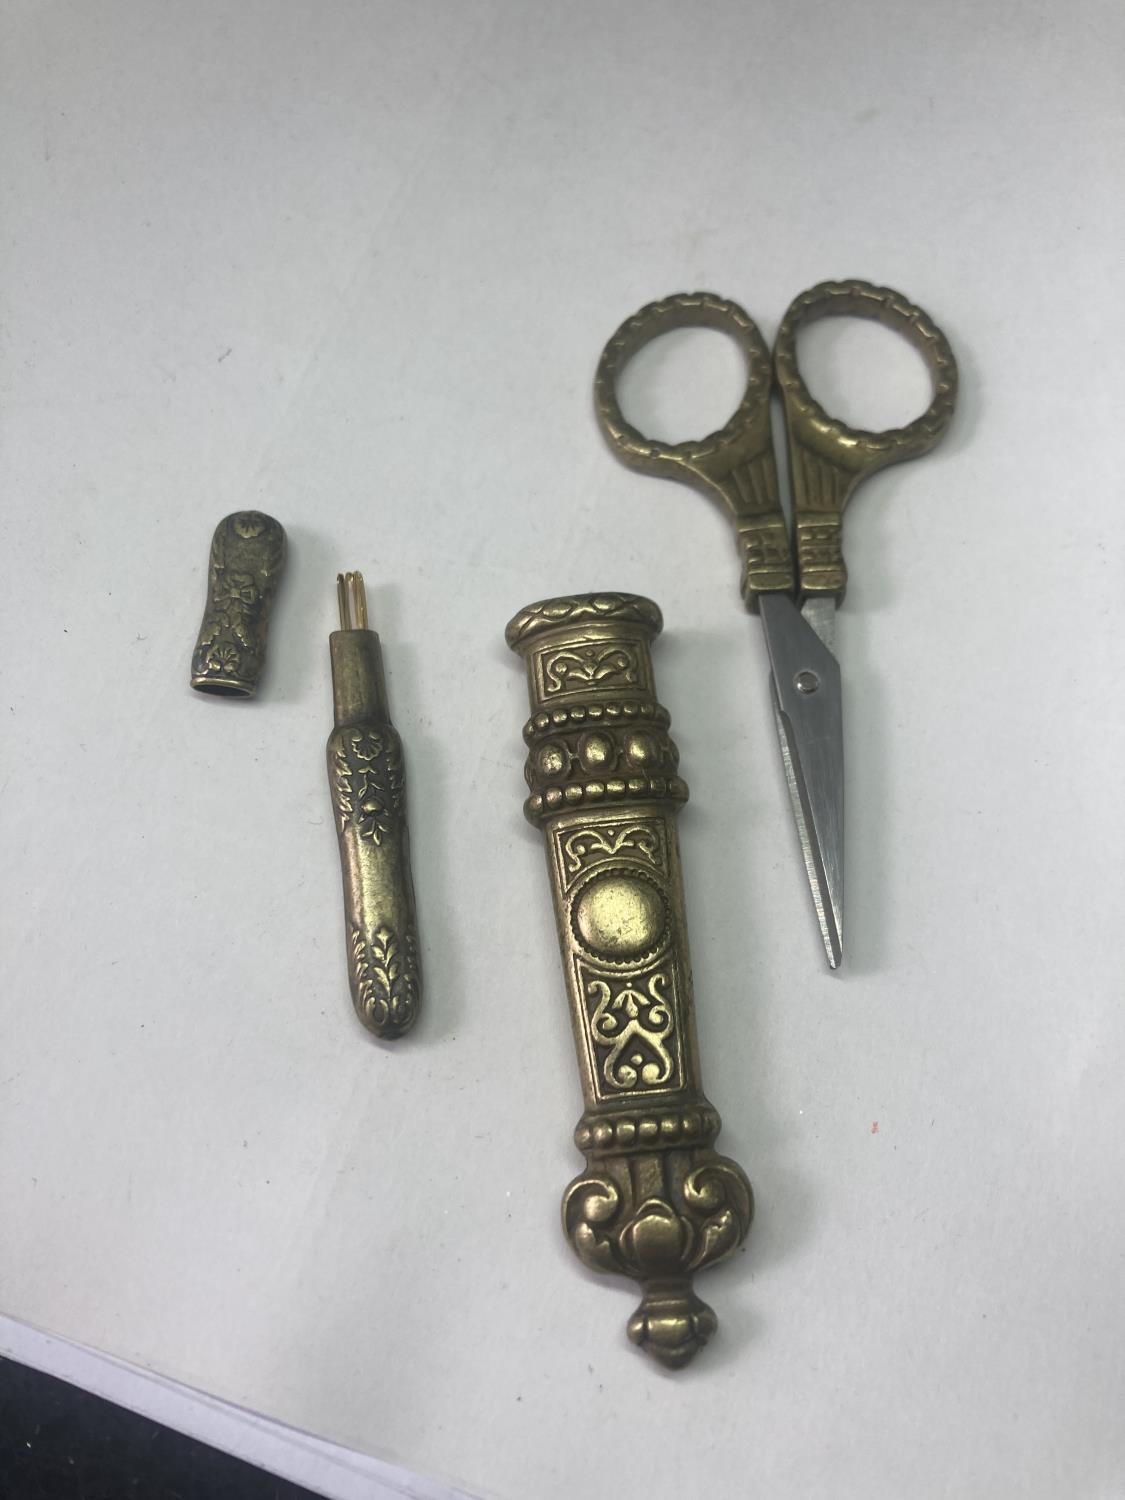 A PAIR OF DECORATIVE BRASS DRESS MAKING SCISSORS AND A NEEDLE CASE - Image 2 of 8